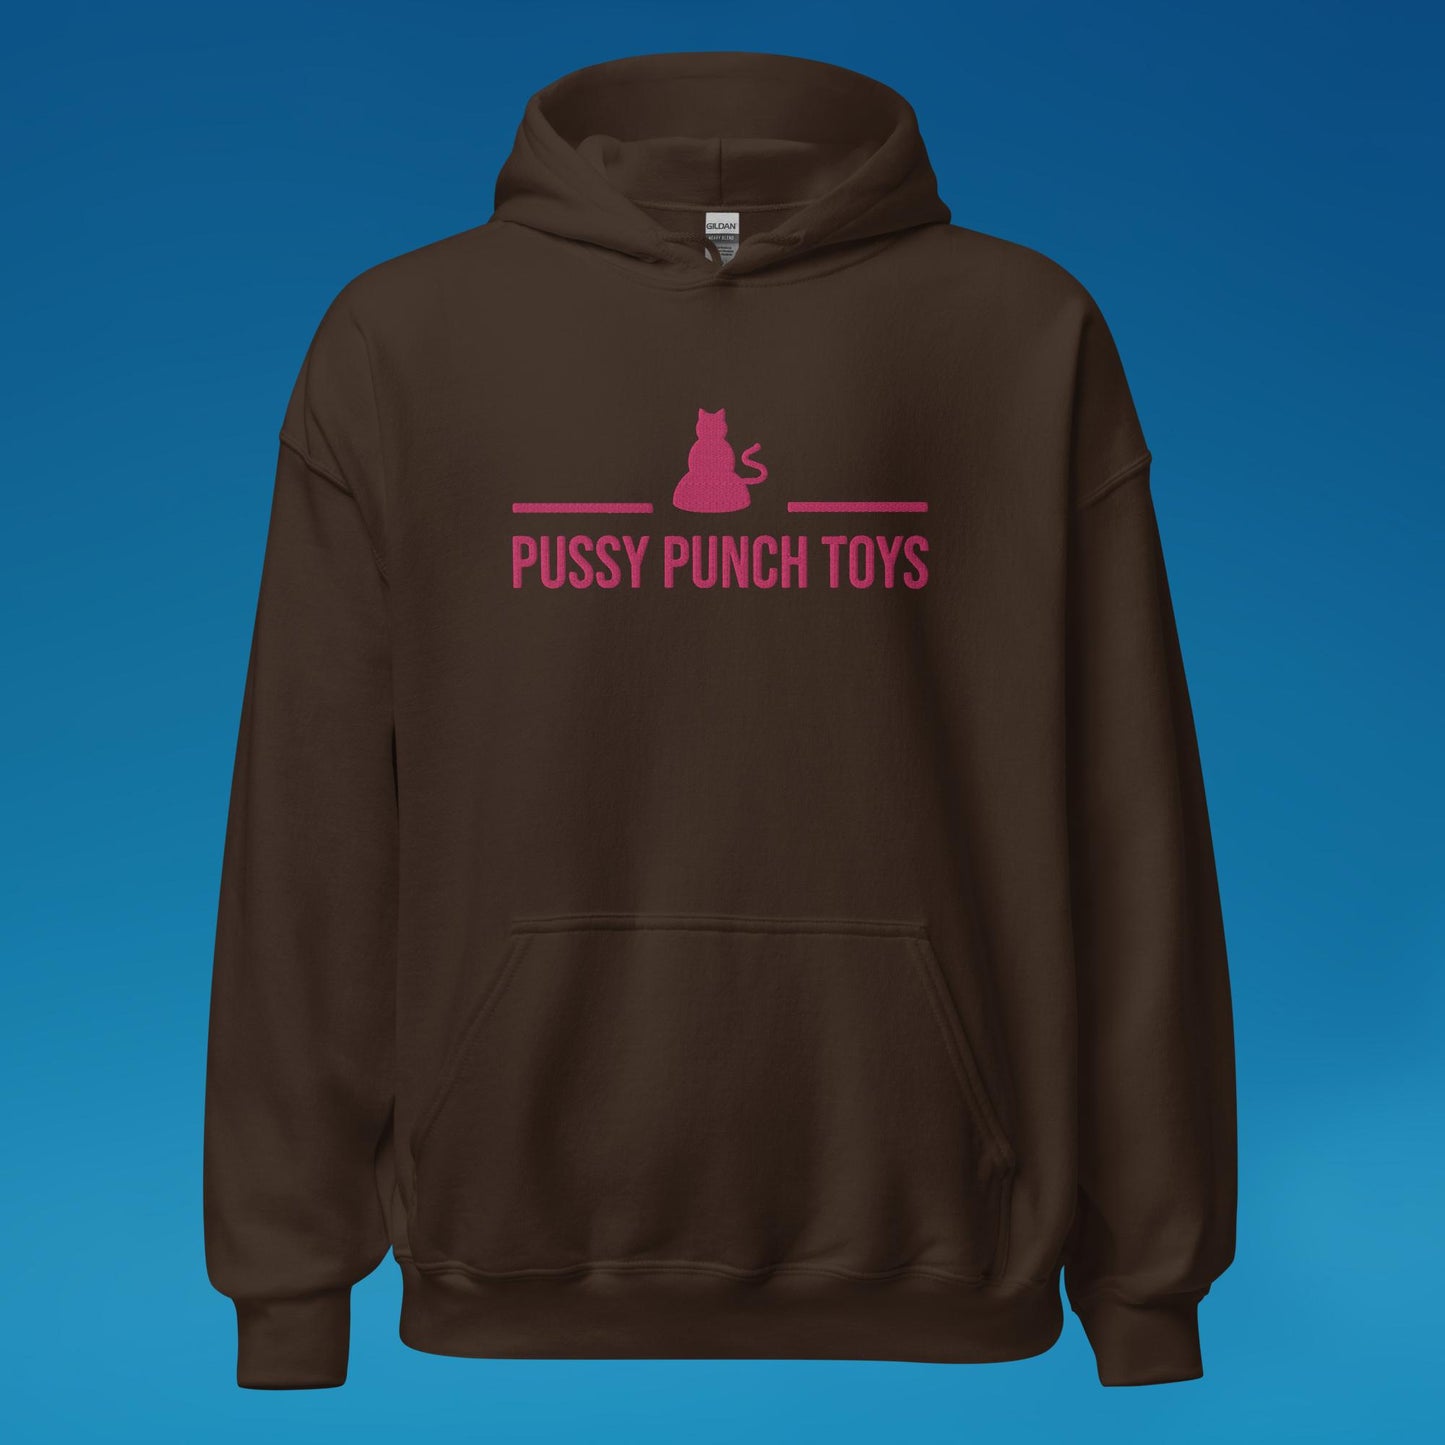 Pussy Punch Toys Hoody (embroidered)